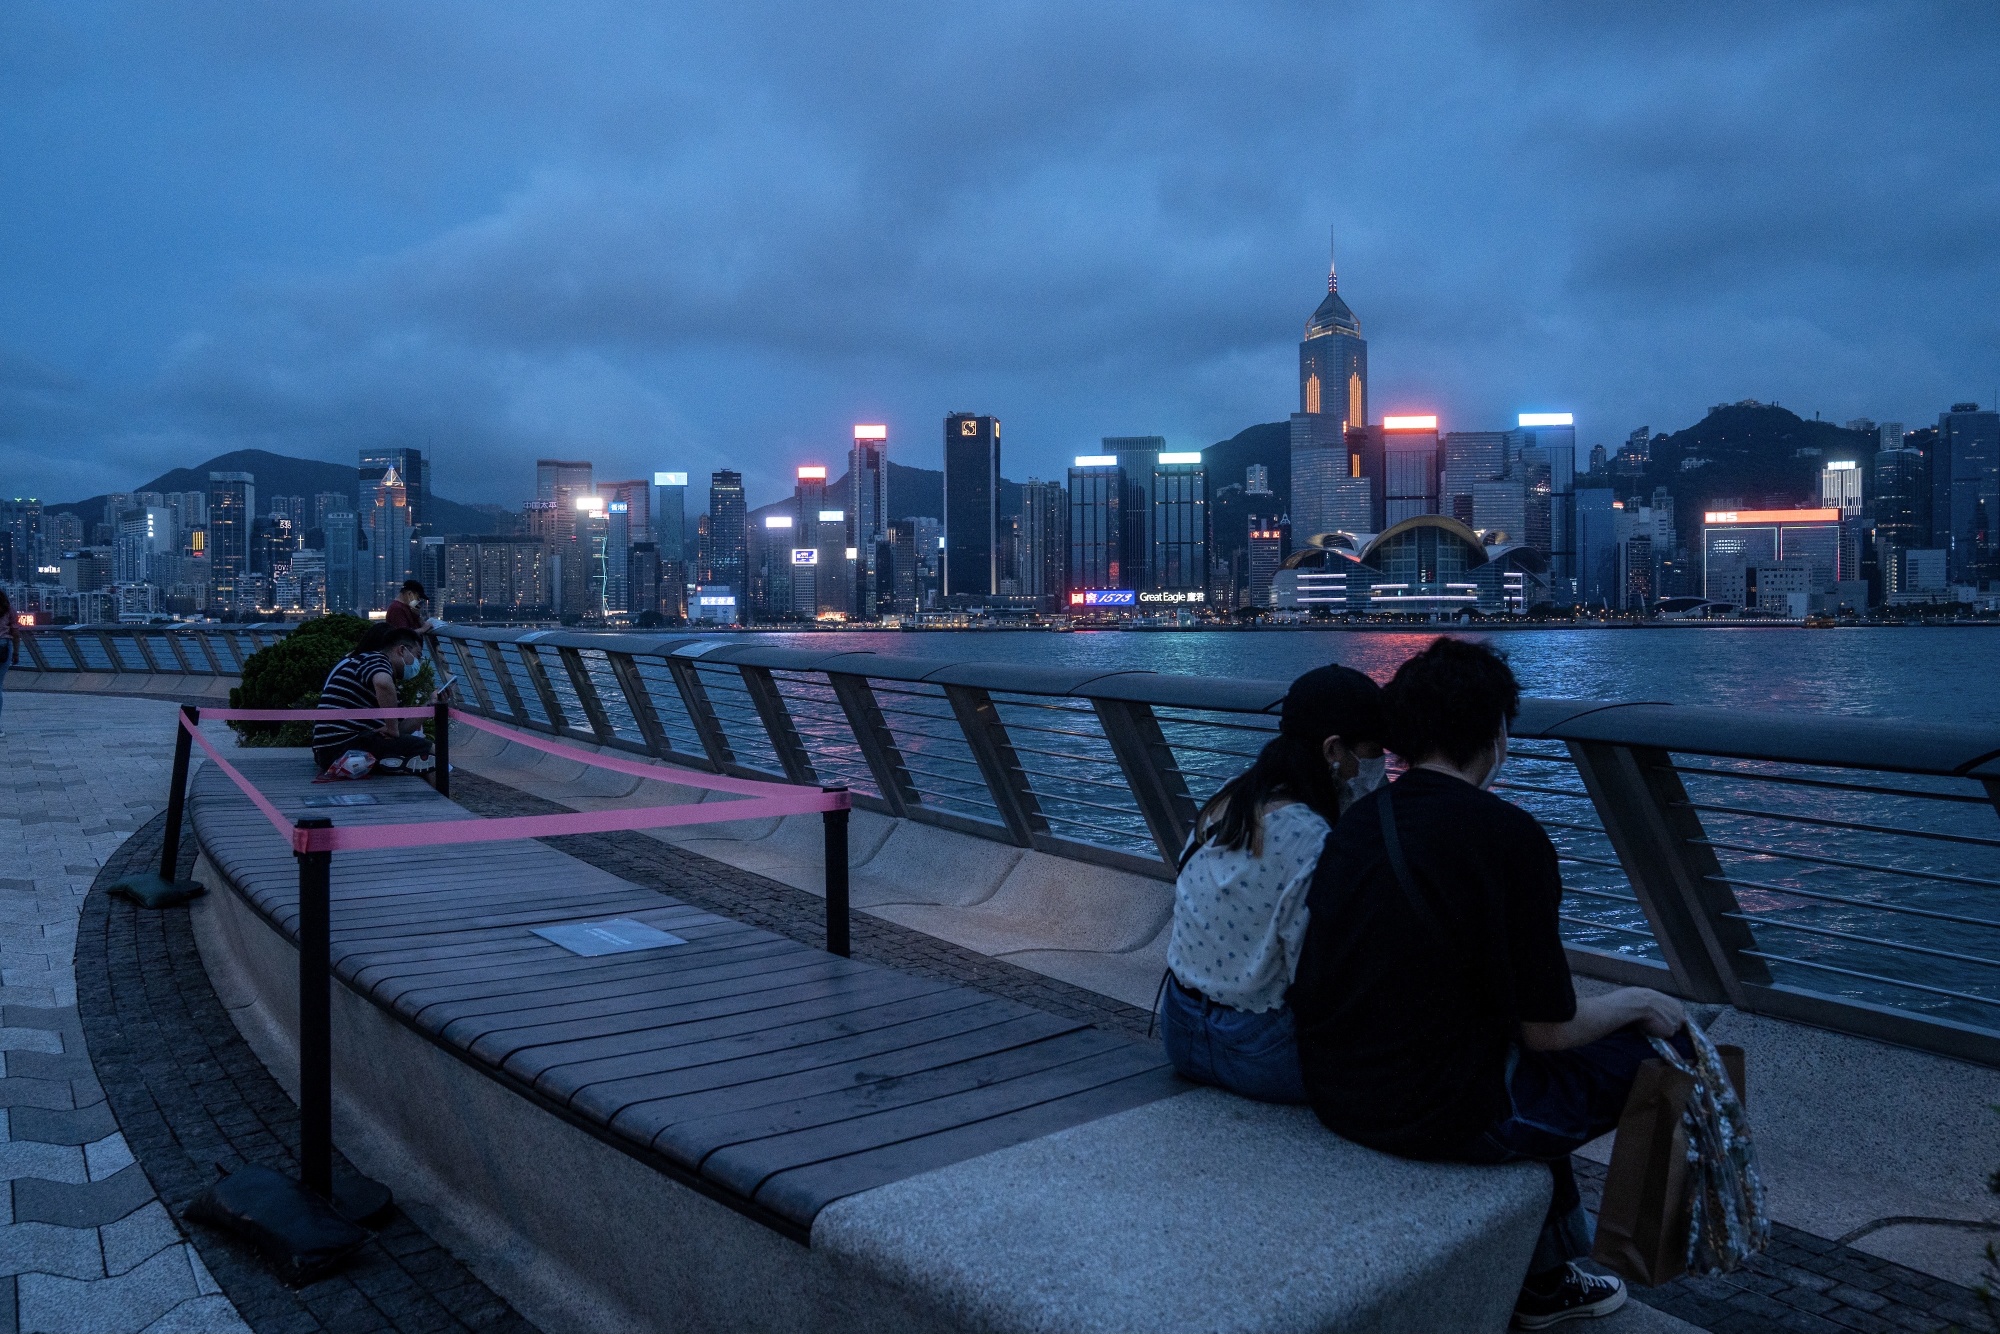 Visitors sit on a bench along the promenade at Victoria Harbour in the Tsim Sha Tsui district of Hong Kong.